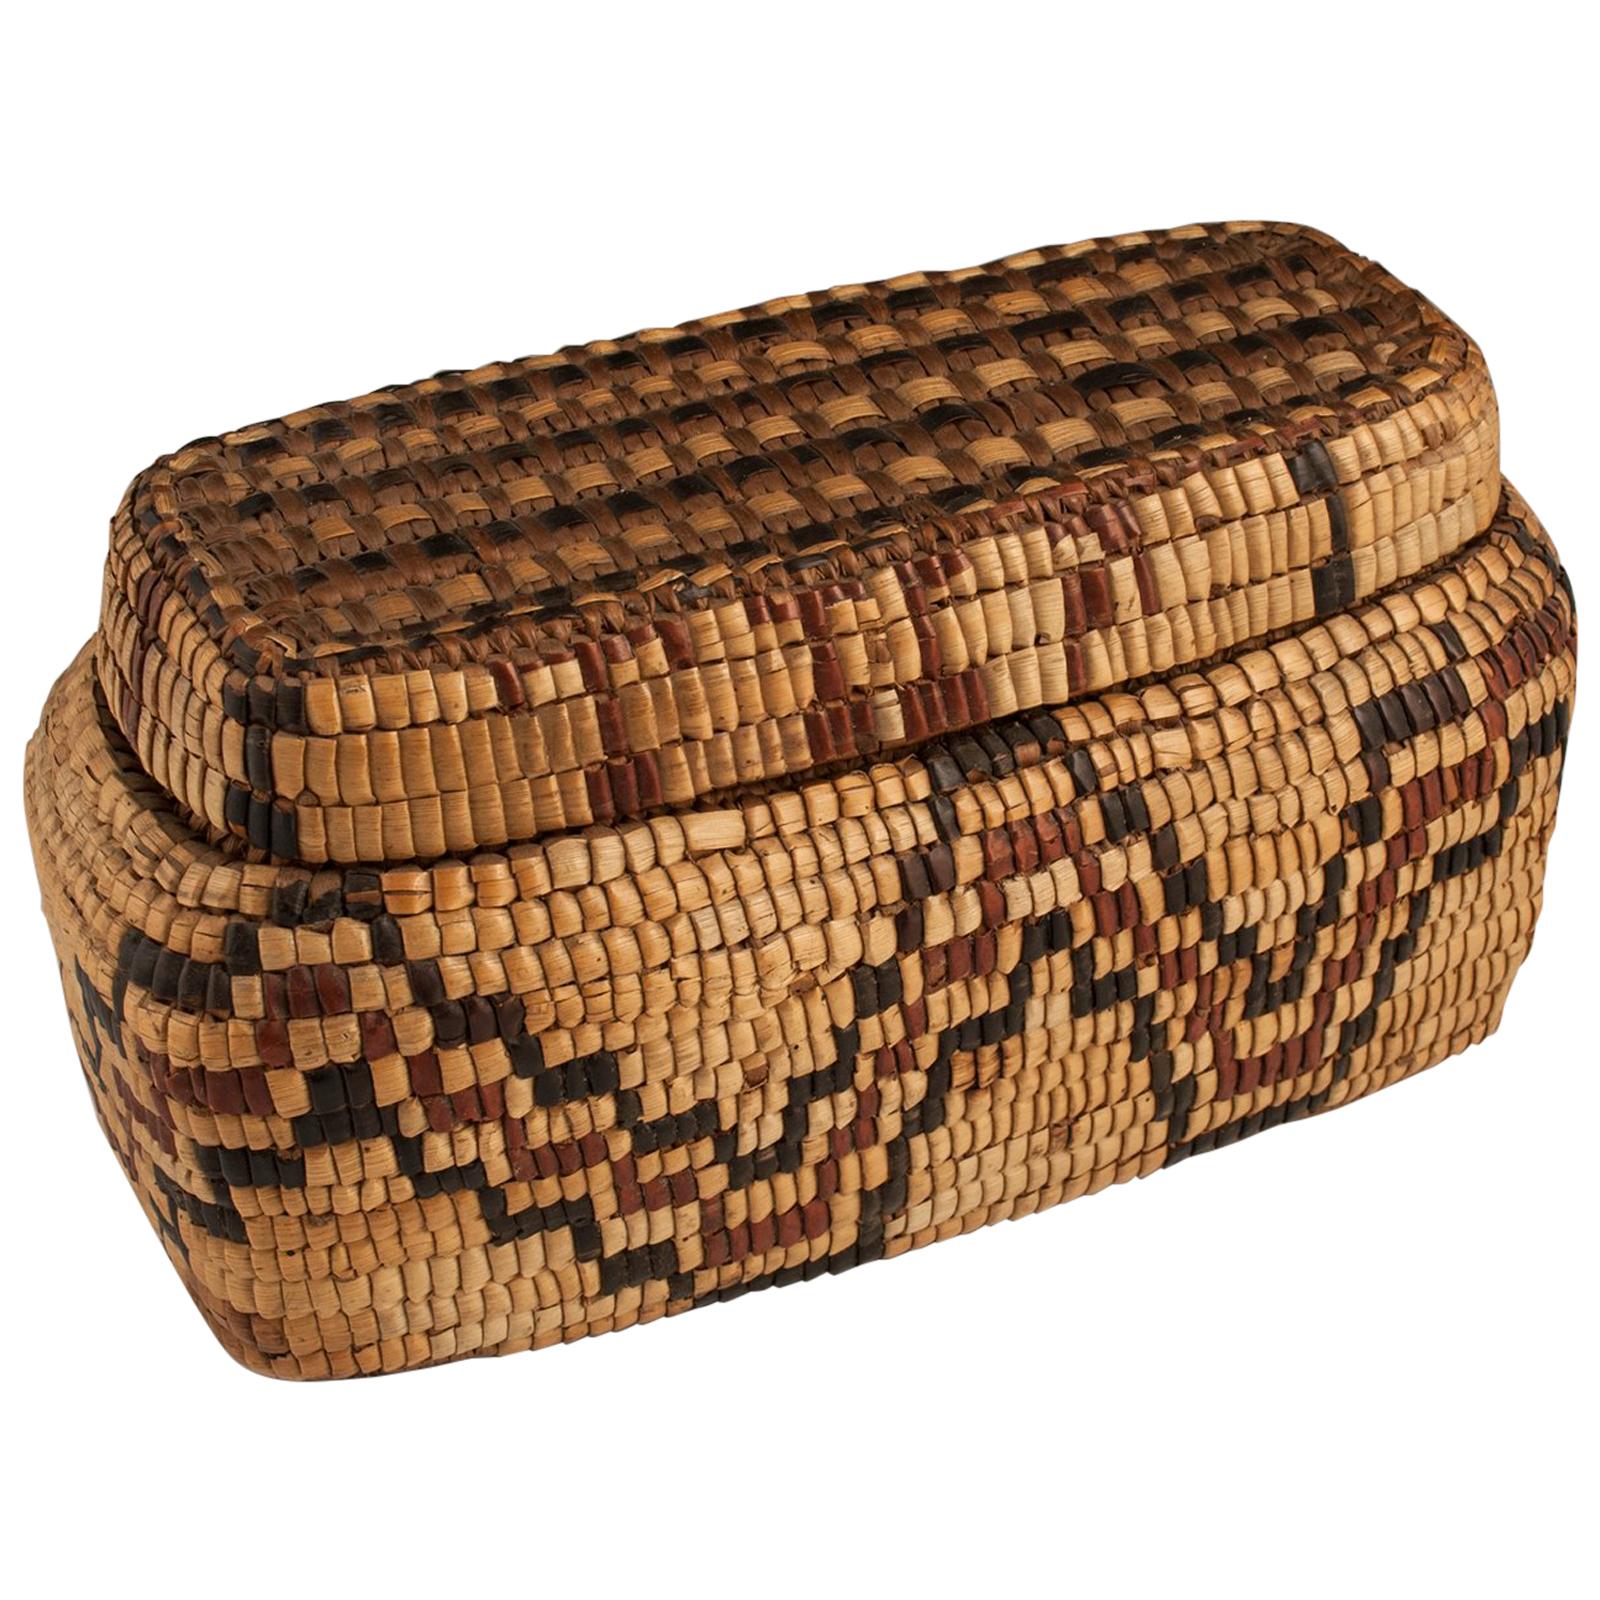 Late 19th-Early 20th Century Tribal Native American Columbia River Basket